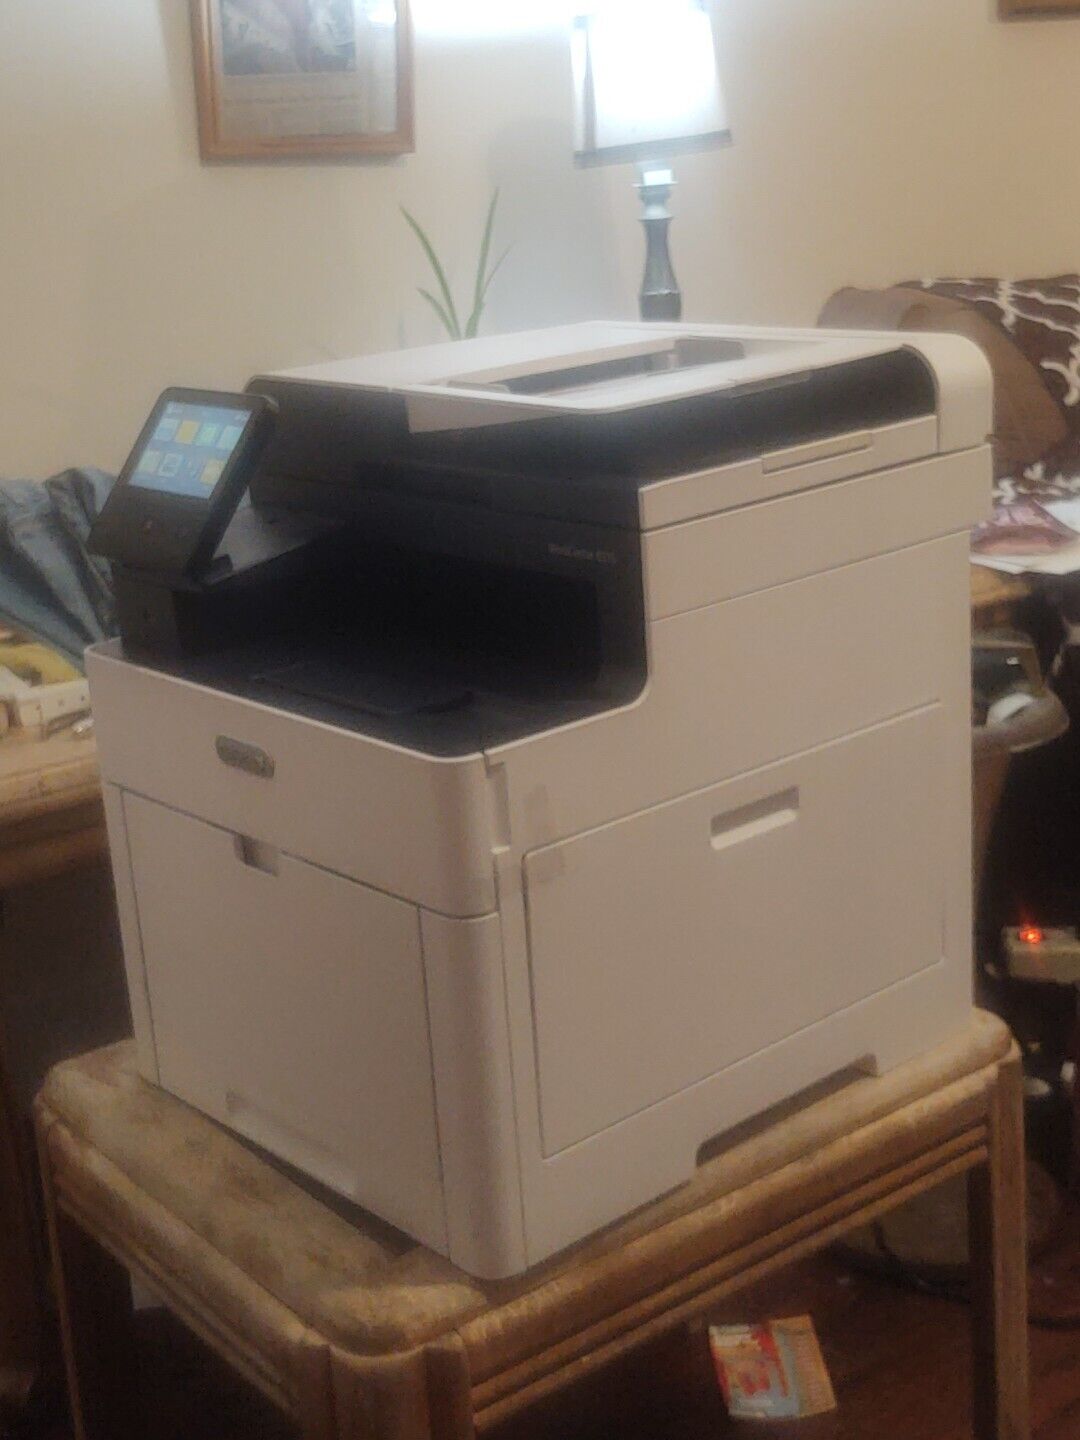  Xerox Workcentre 6515/DNI Color Multifunction Printer W/WIFI THING